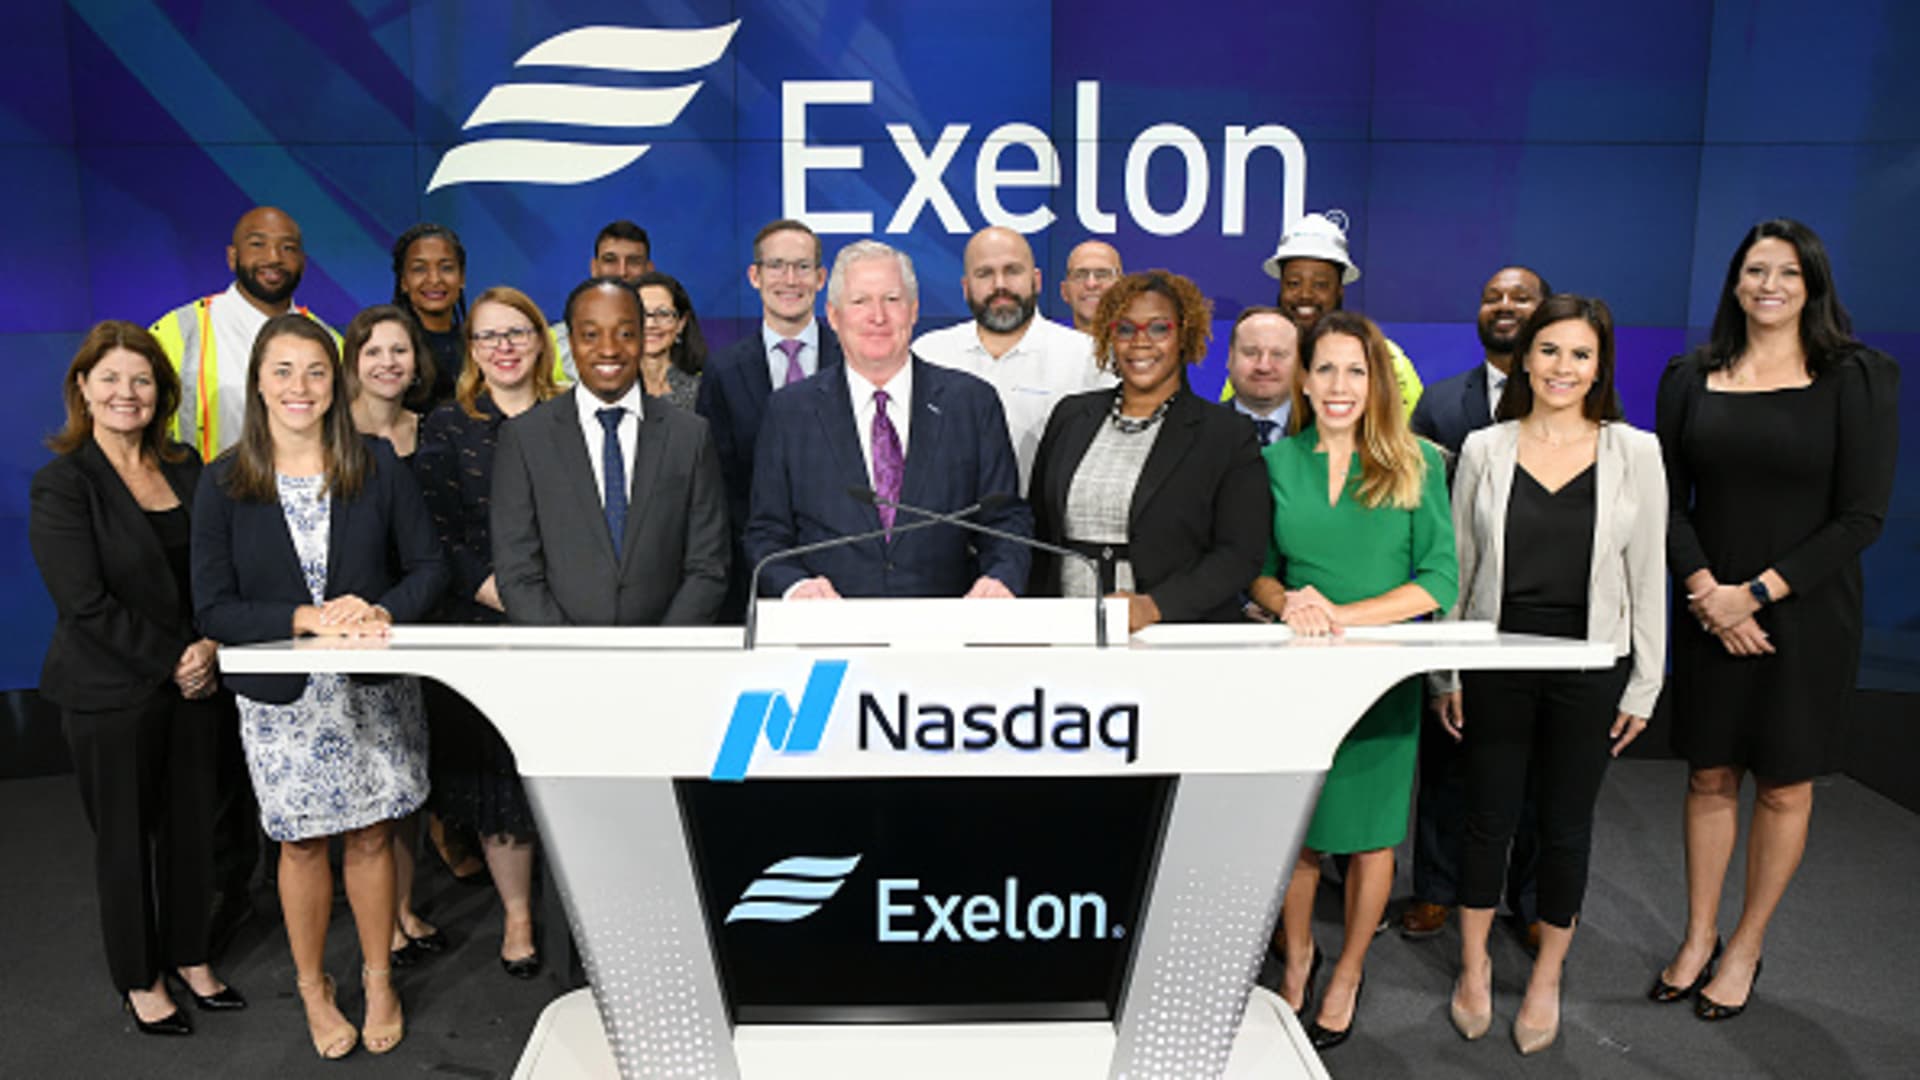 NEW YORK, NEW YORK - SEPTEMBER 25: Chris Crane (C) and the Exelon Corp. team attend as Exelon Corp. Rings Nasdaq Opening Bell at NASDAQ MarketSite on September 25, 2019 in New York City. (Photo by Jared Siskin/Patrick McMullan via Getty Images)